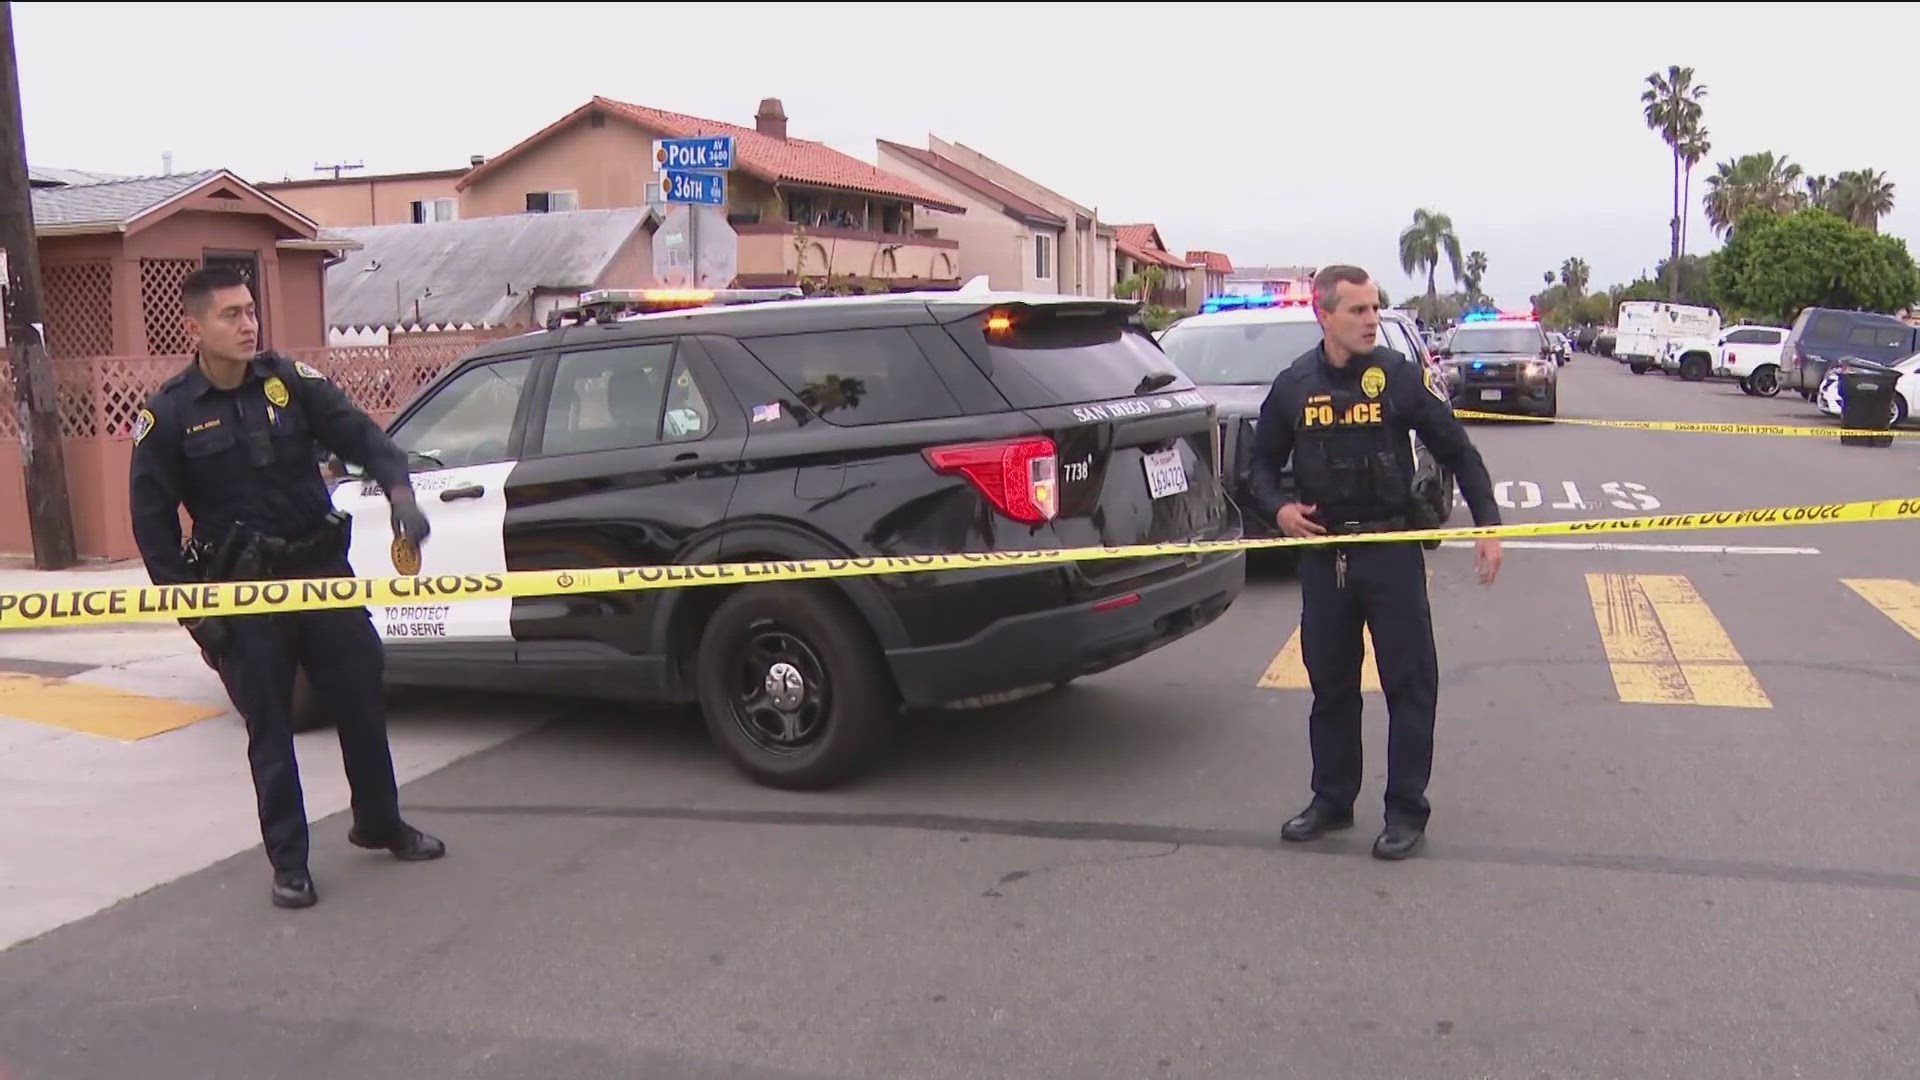 San Diego Police are searching for the person who shot and killed a man in City Heights, according to Lieutenant Jeud Campbell.